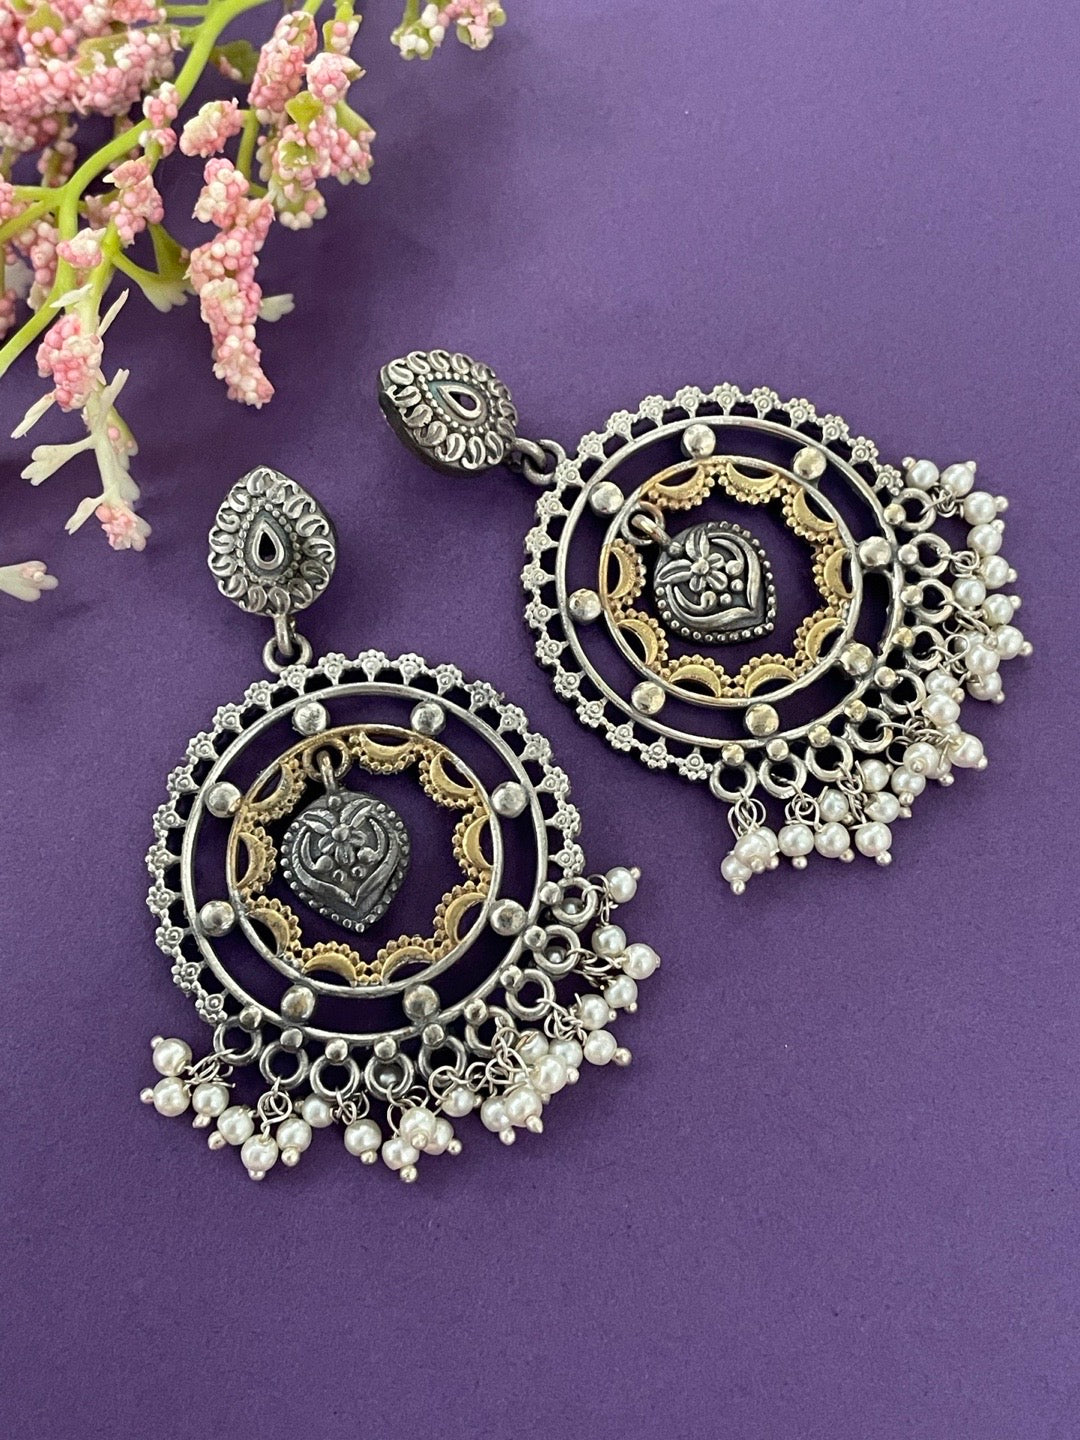 image for Earrings Round Shape With Pearls Designs